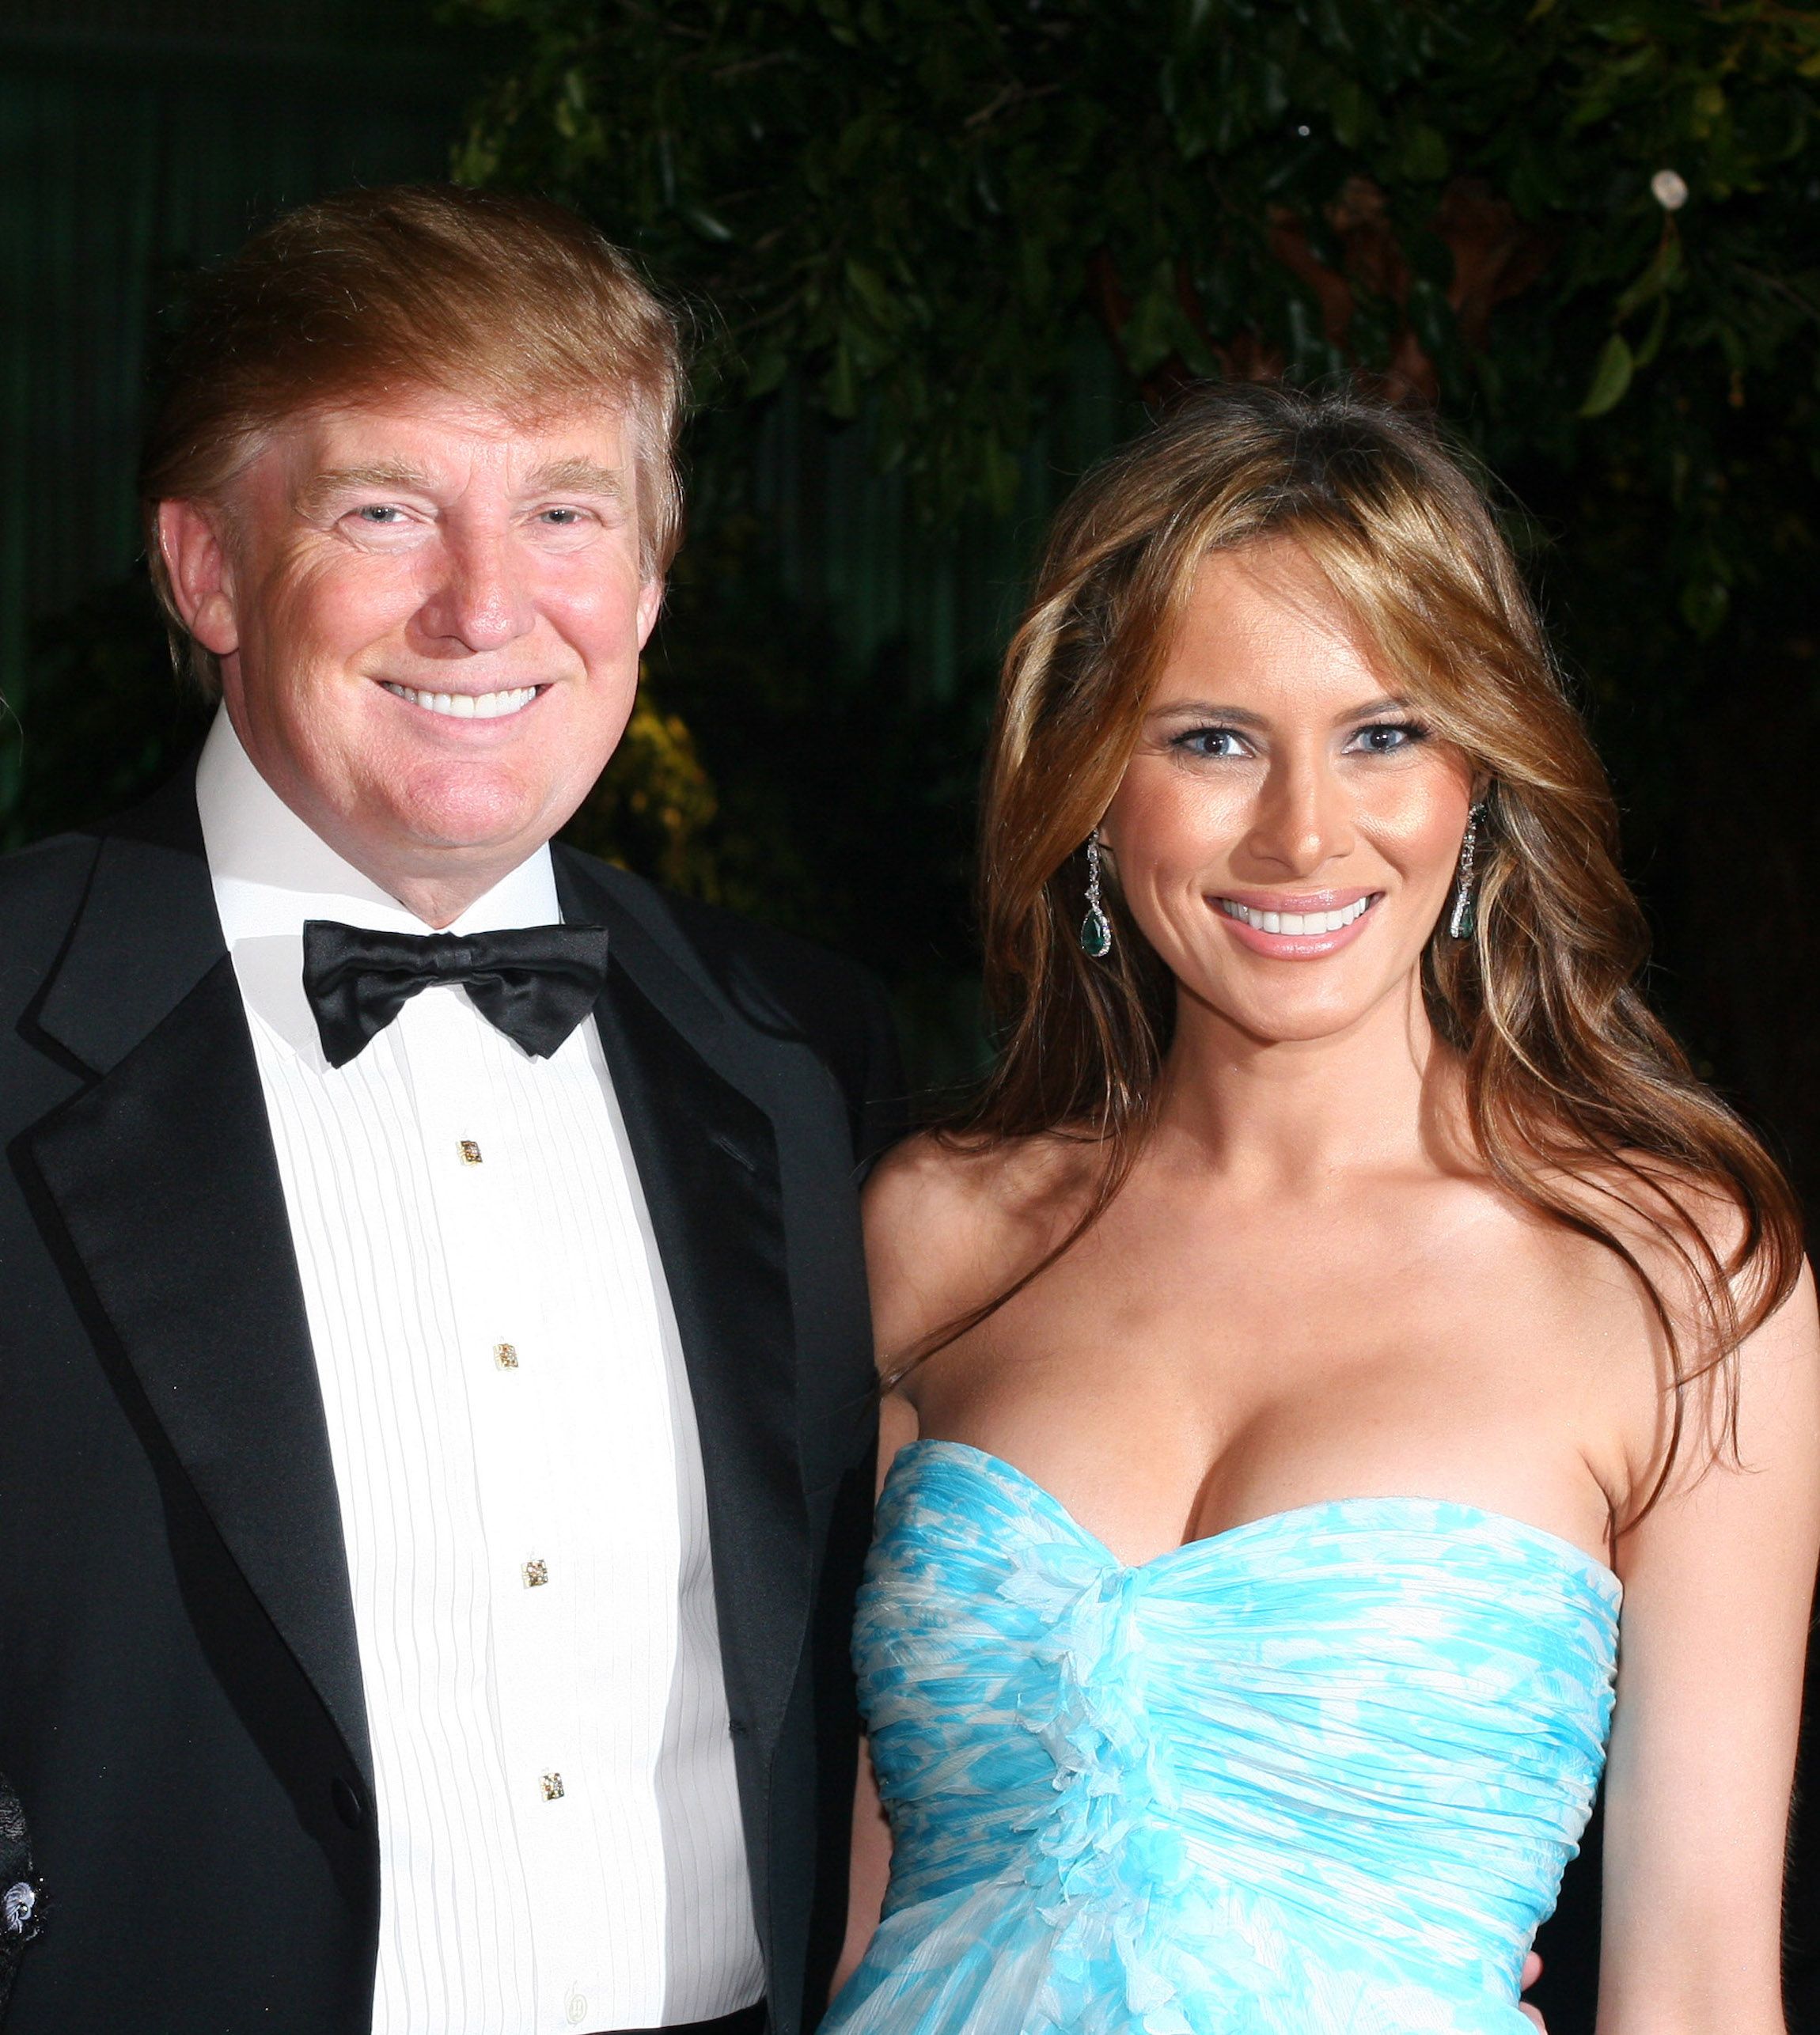 Pictures of Donald Trump and Melania's ...